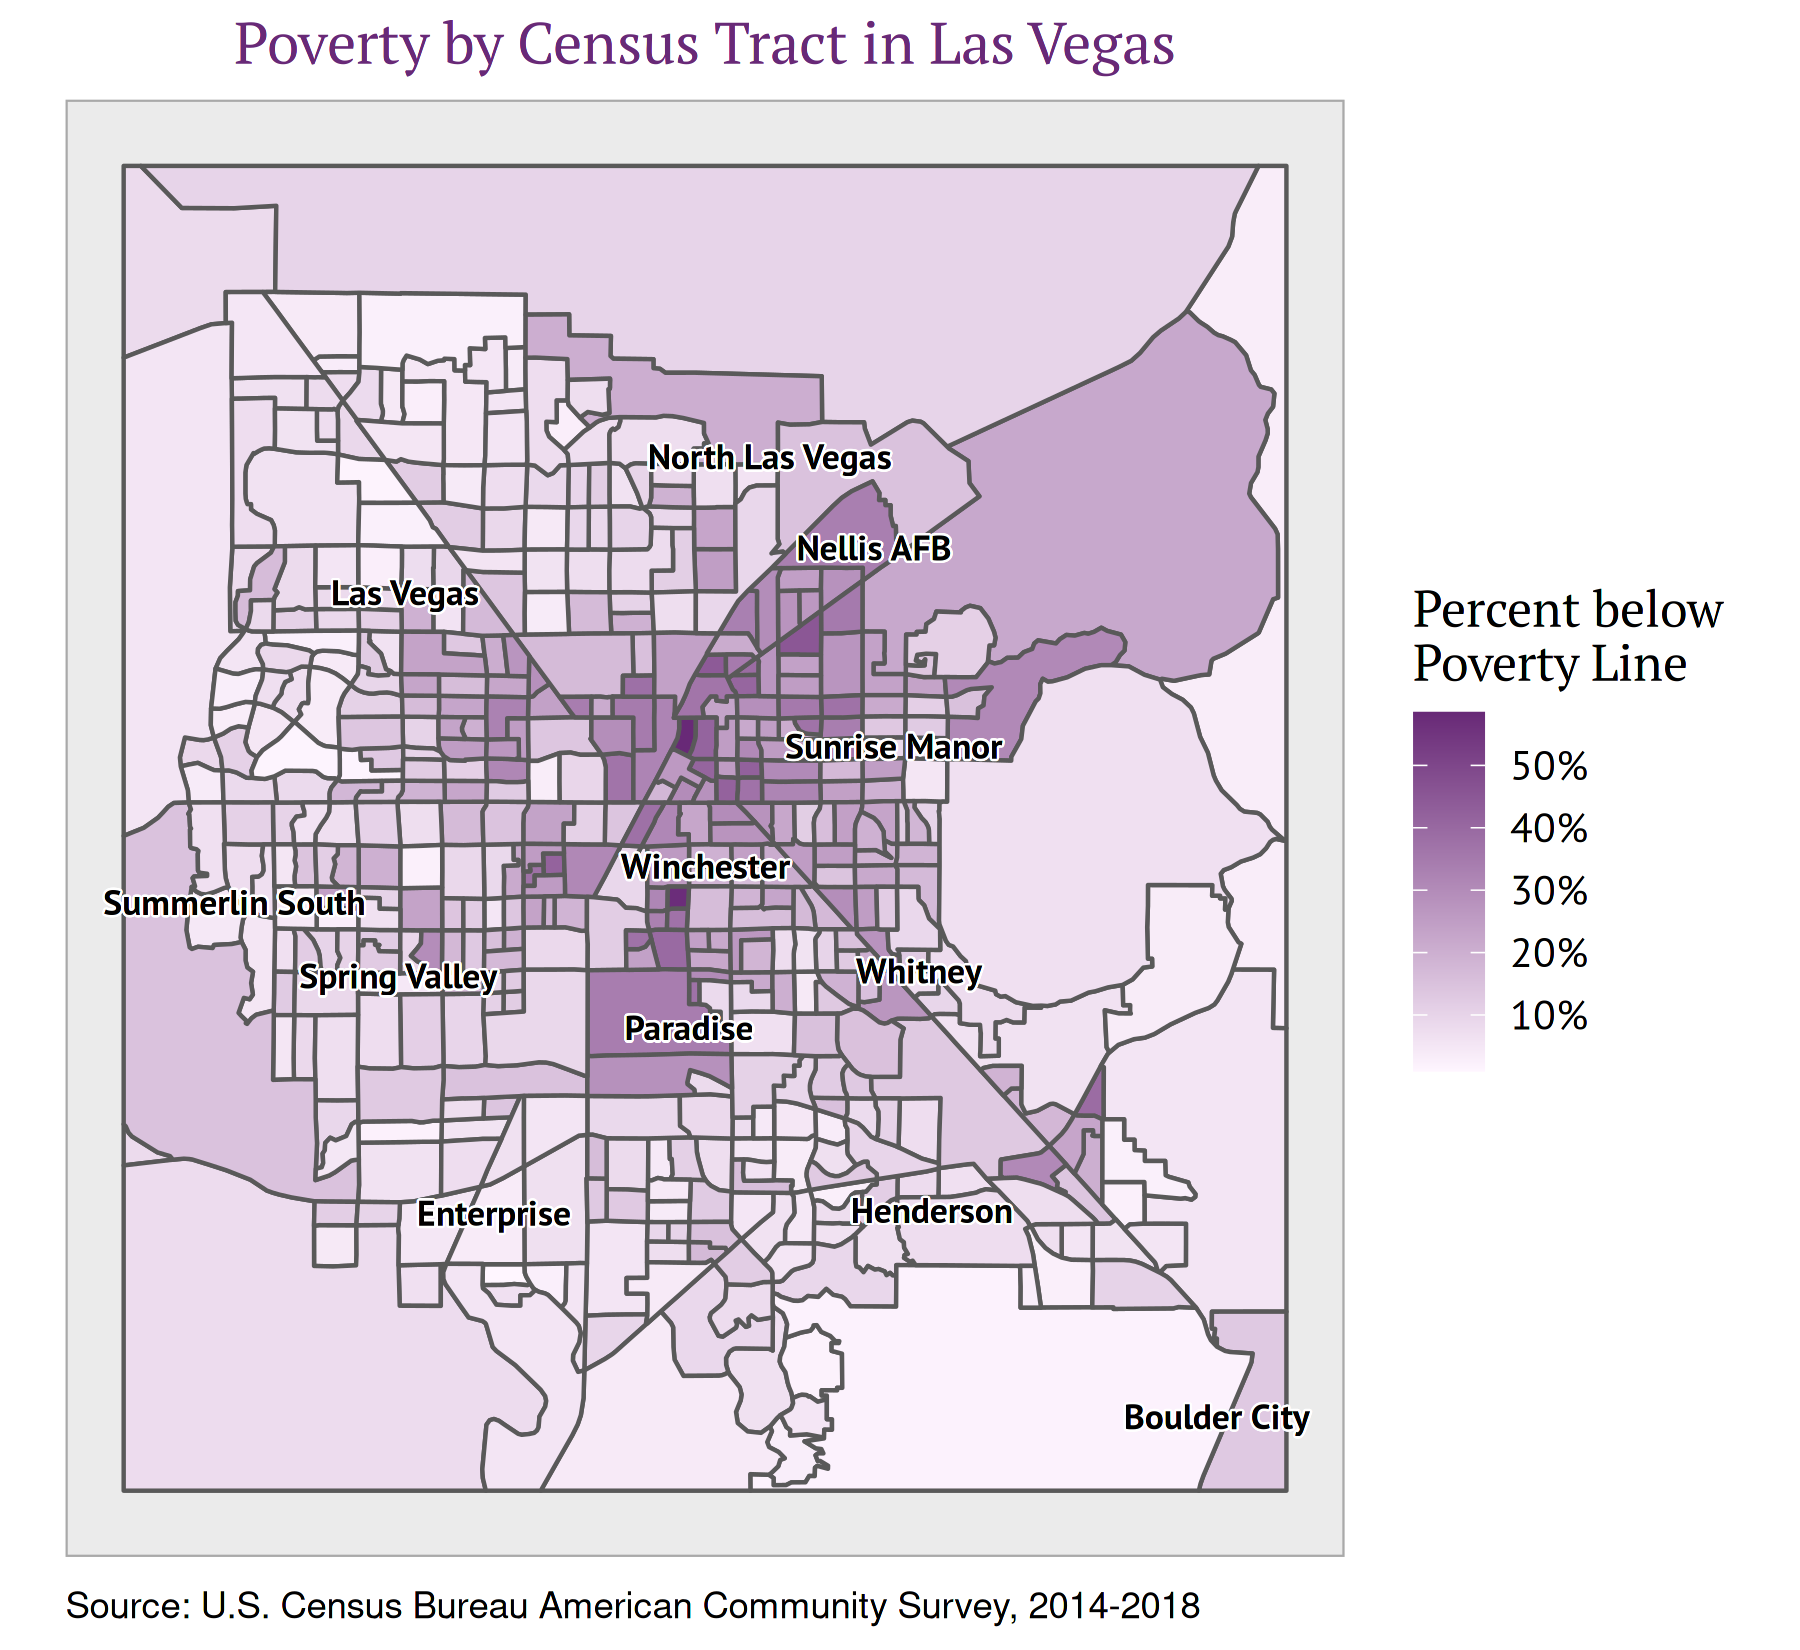 Figure 5: Poverty by Census Tract in Las Vegas, Nevada